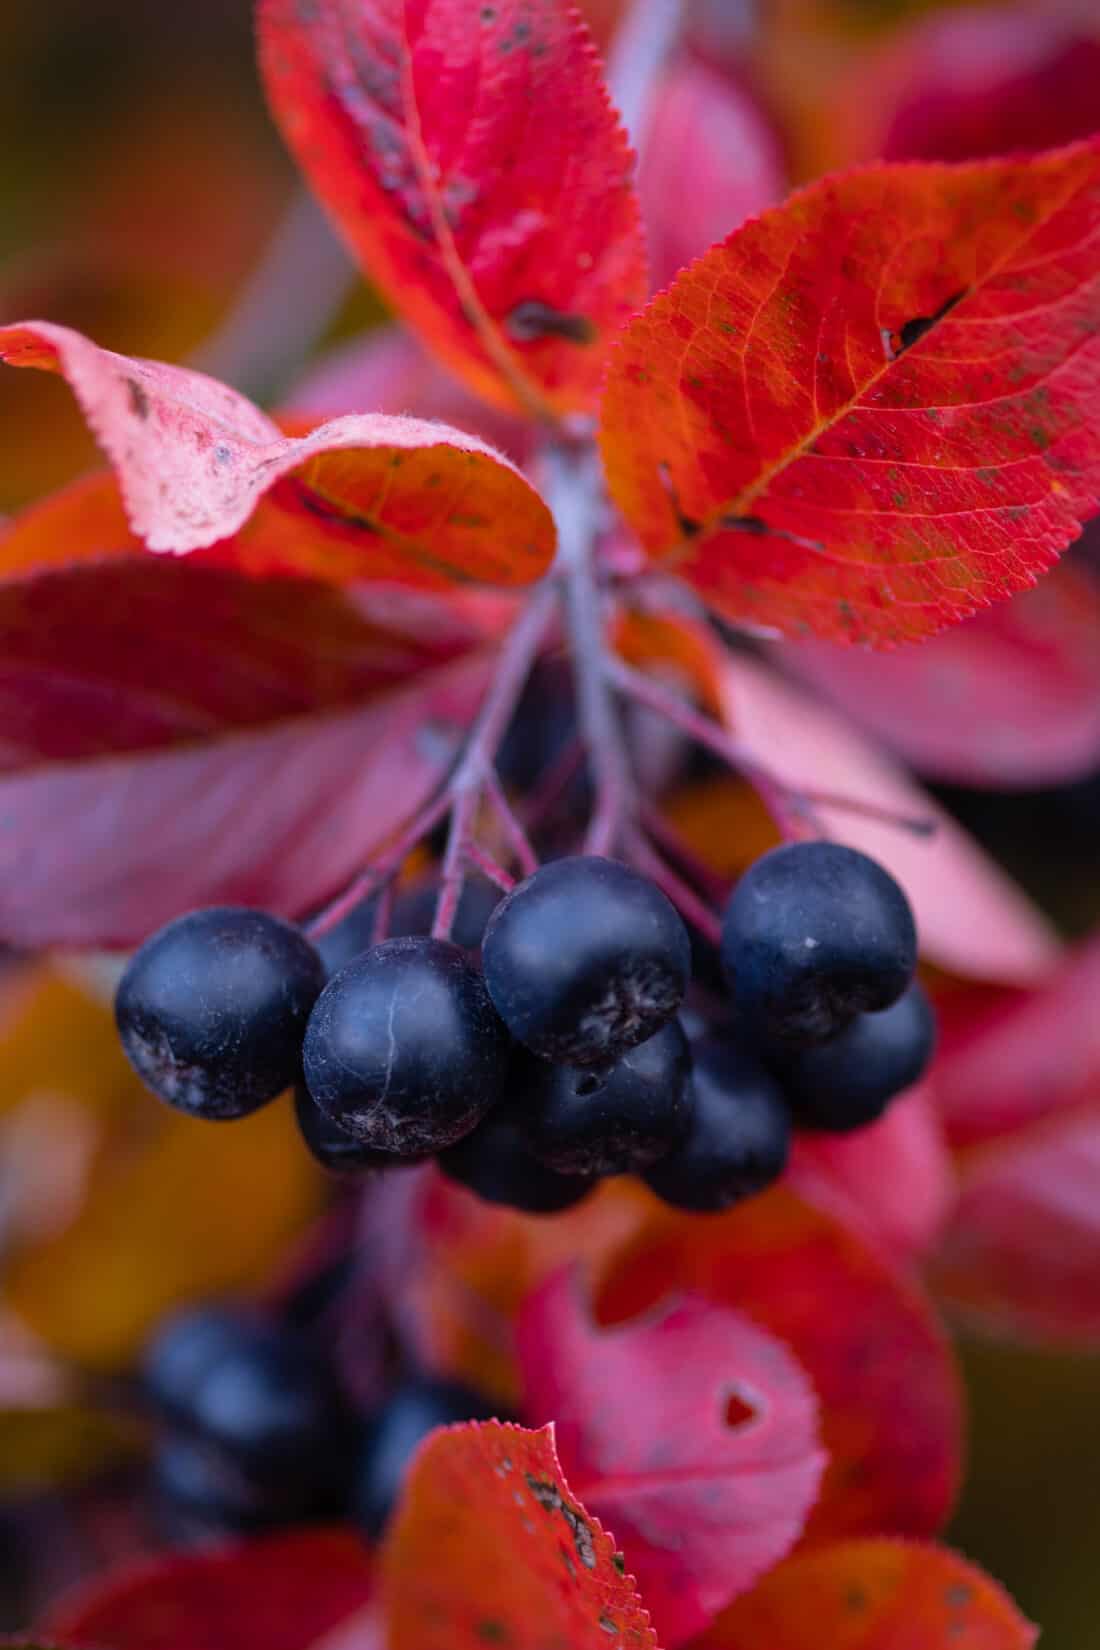 A bunch of black berries on a branch with red leaves.